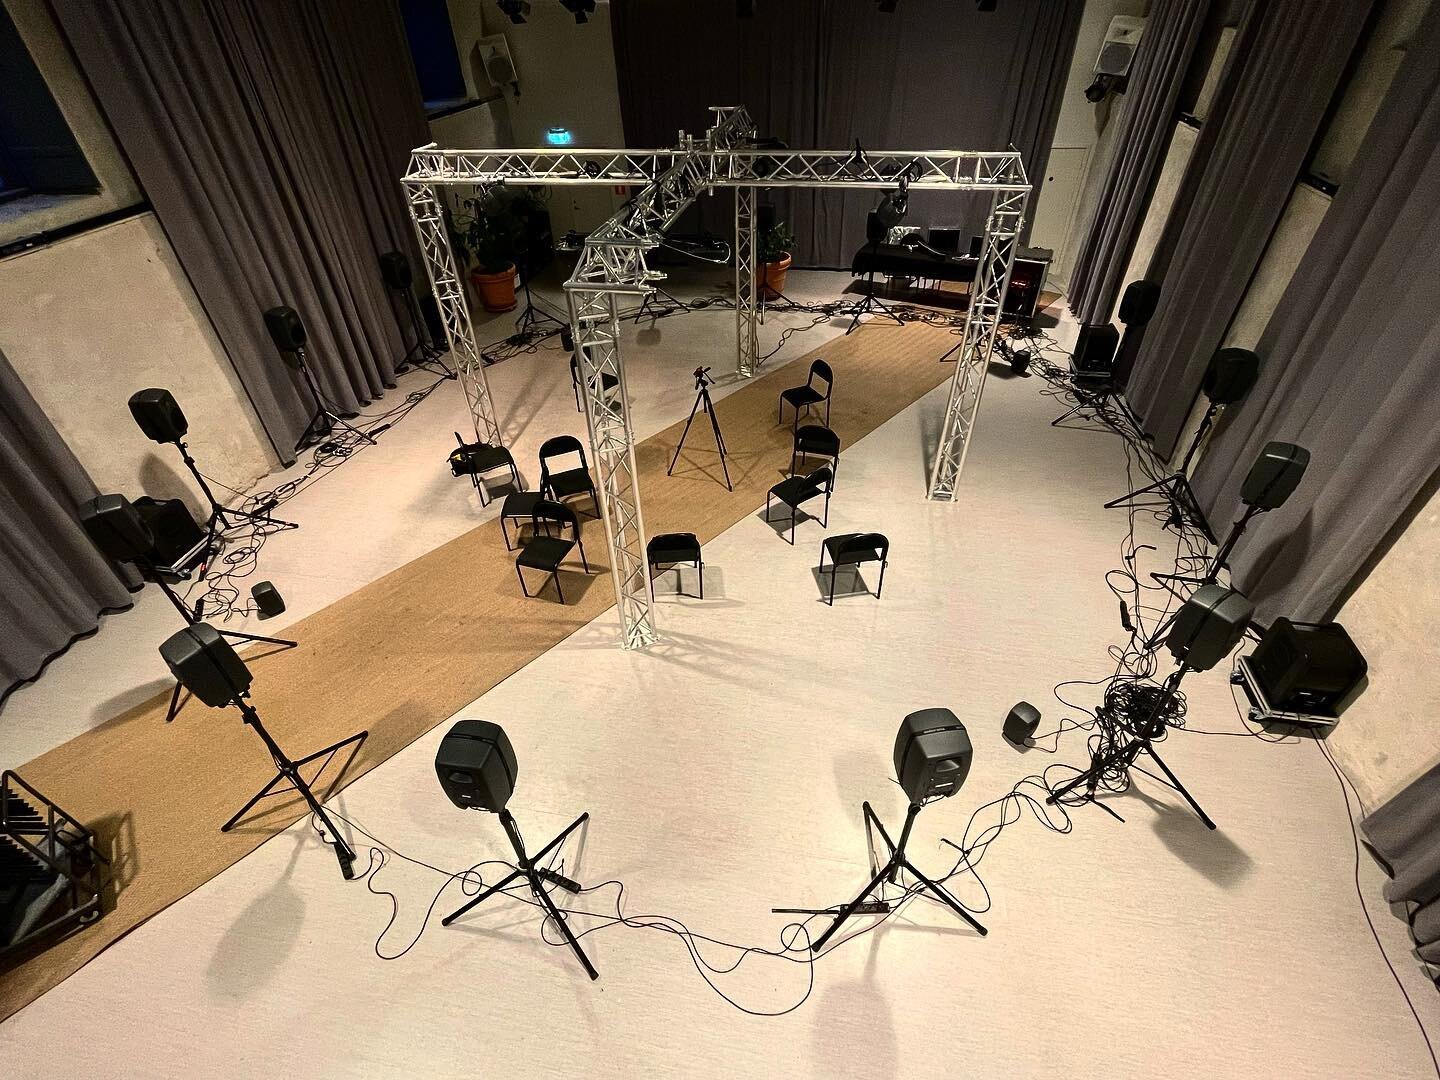 Today&rsquo;s workplace: workshop with the students in Audiorama&rsquo;s big rig, 32 loudspeakers. @audioramasweden @gotlands_tonsattarskola #ambisonics #multichannelaudio #surround @genelec_oy @genelec_usa